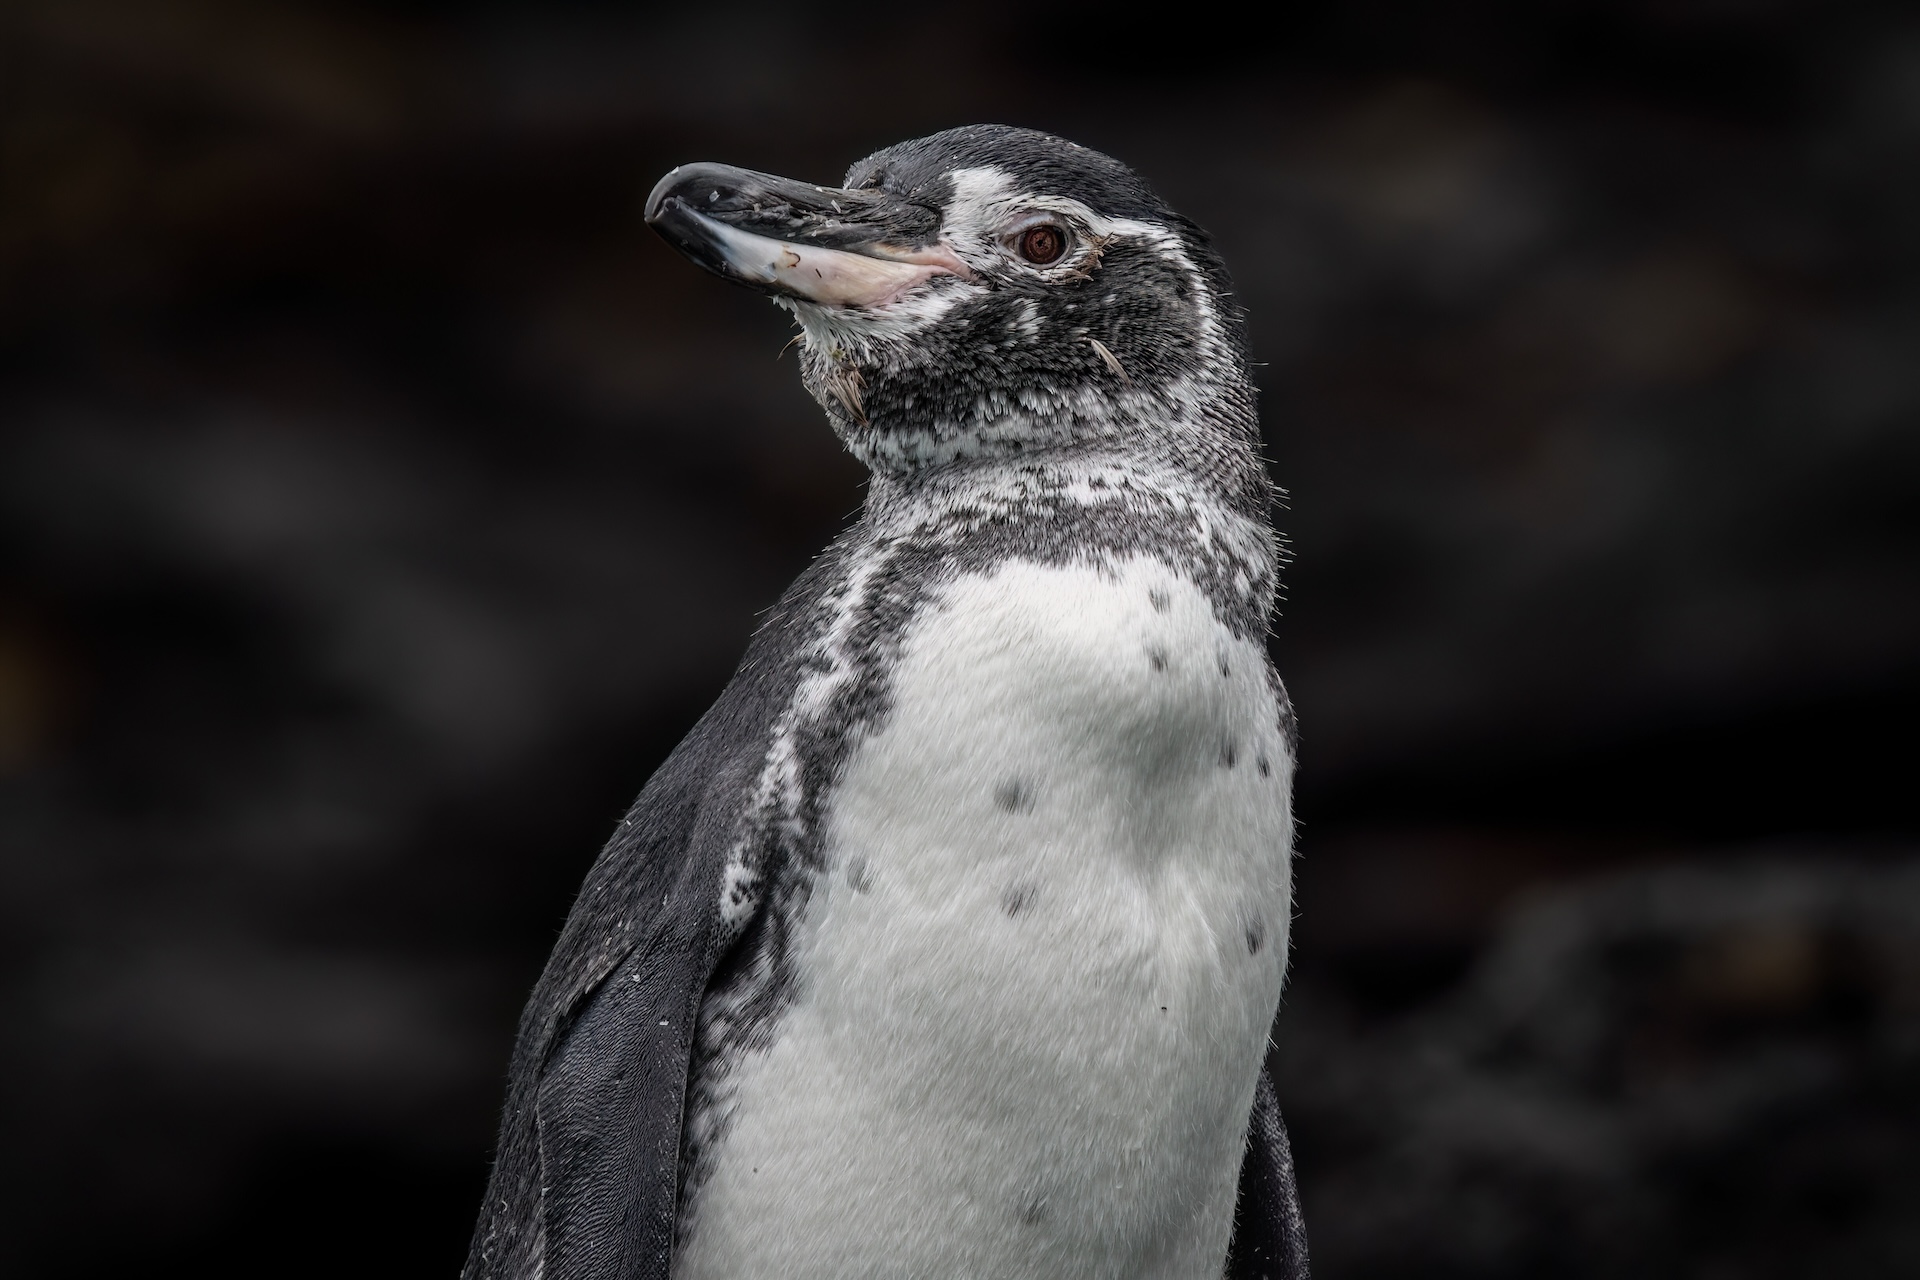 Galapagos penguin by Mike Hillman